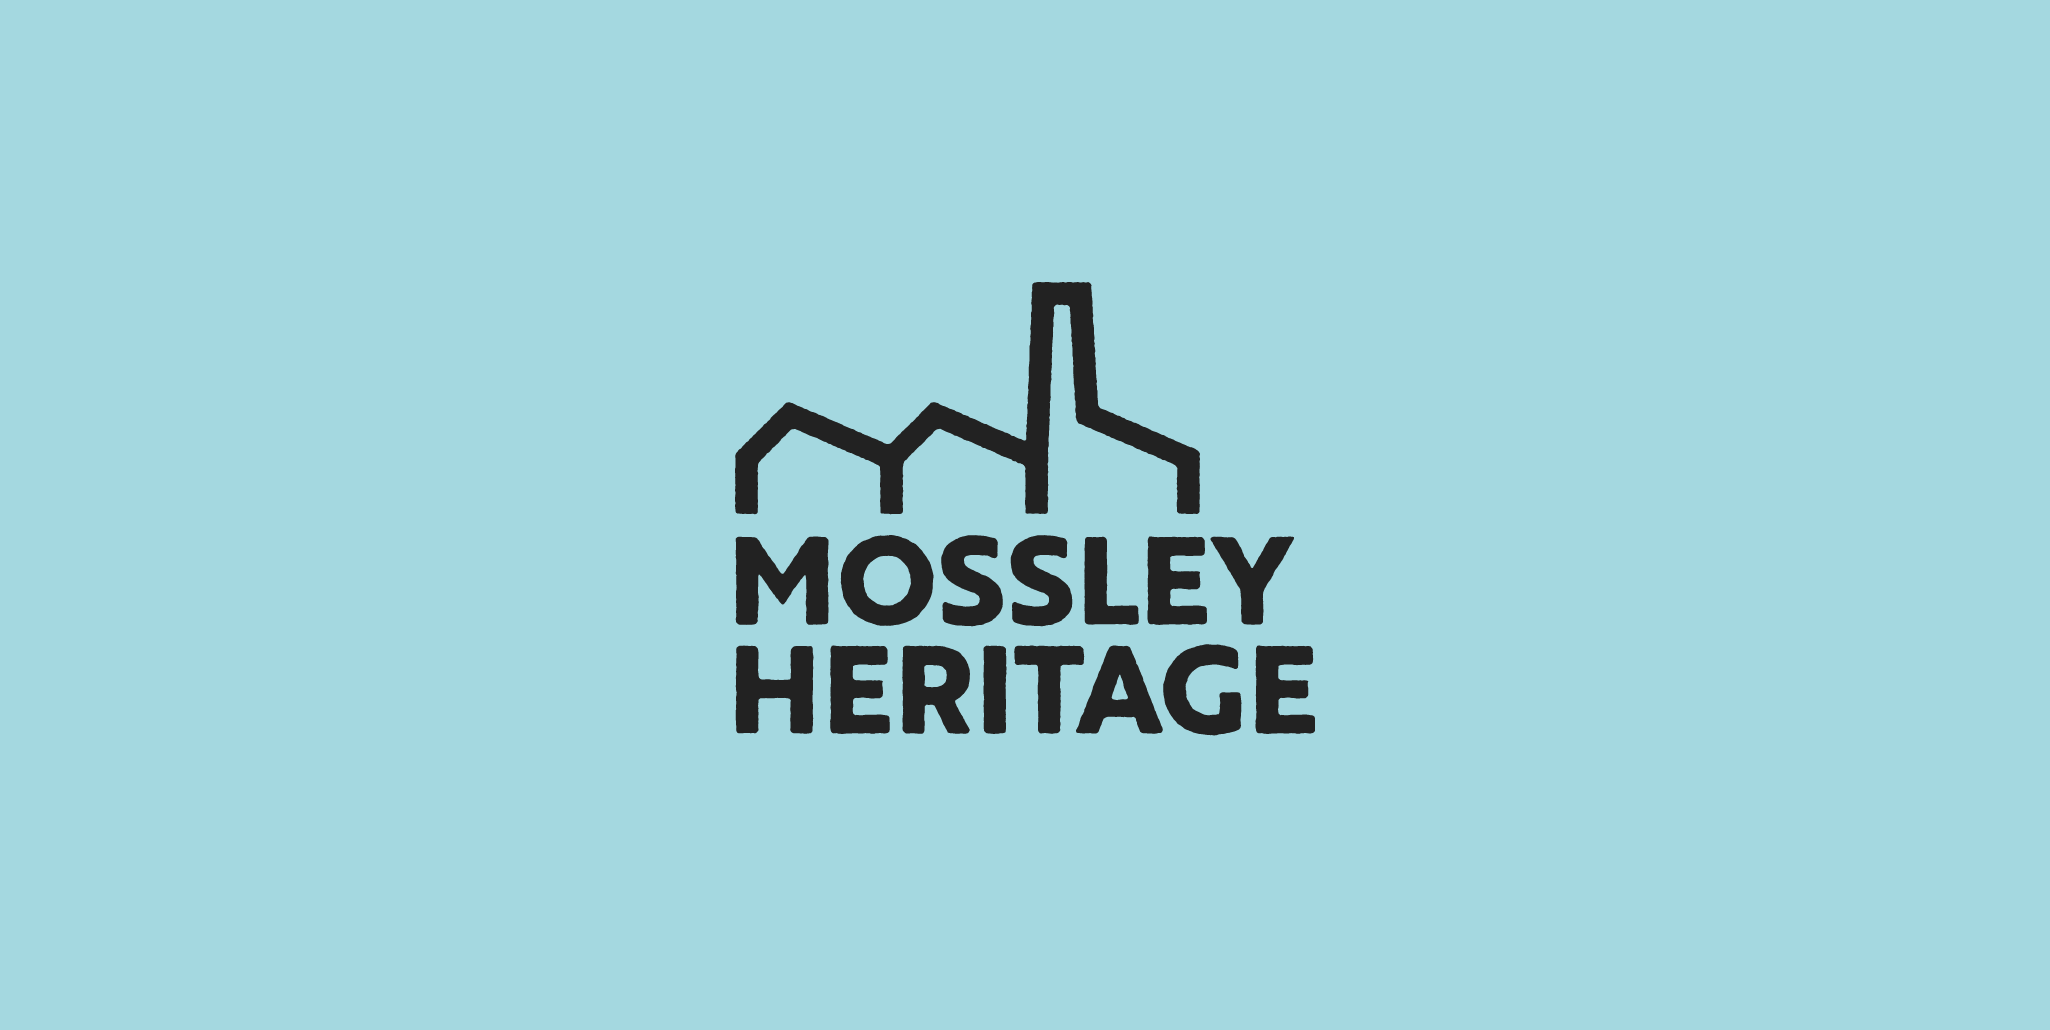 Mossley Heritage's new logo created by GFSC, showing a stylised chimney and rooftops